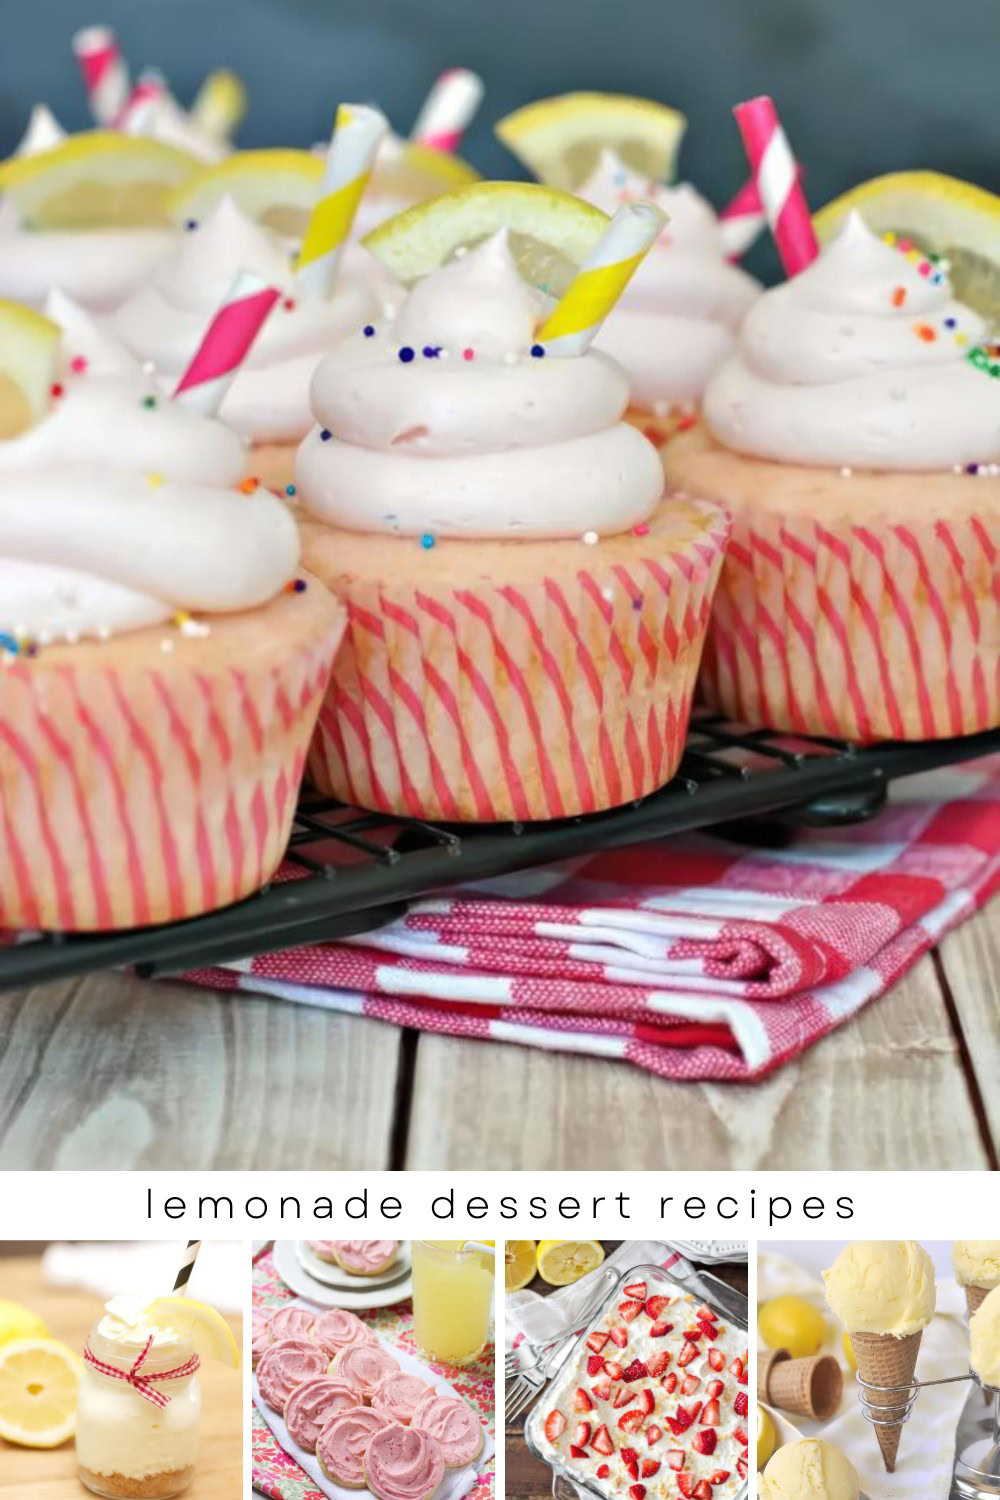 Calling all lemonade enthusiasts! Discover our delightful lemonade dessert recipes perfect for any occasion. Indulge in tangy delights like lemon bars and citrus cakes. 🍋🎂 #LemonLovers #DessertInspo